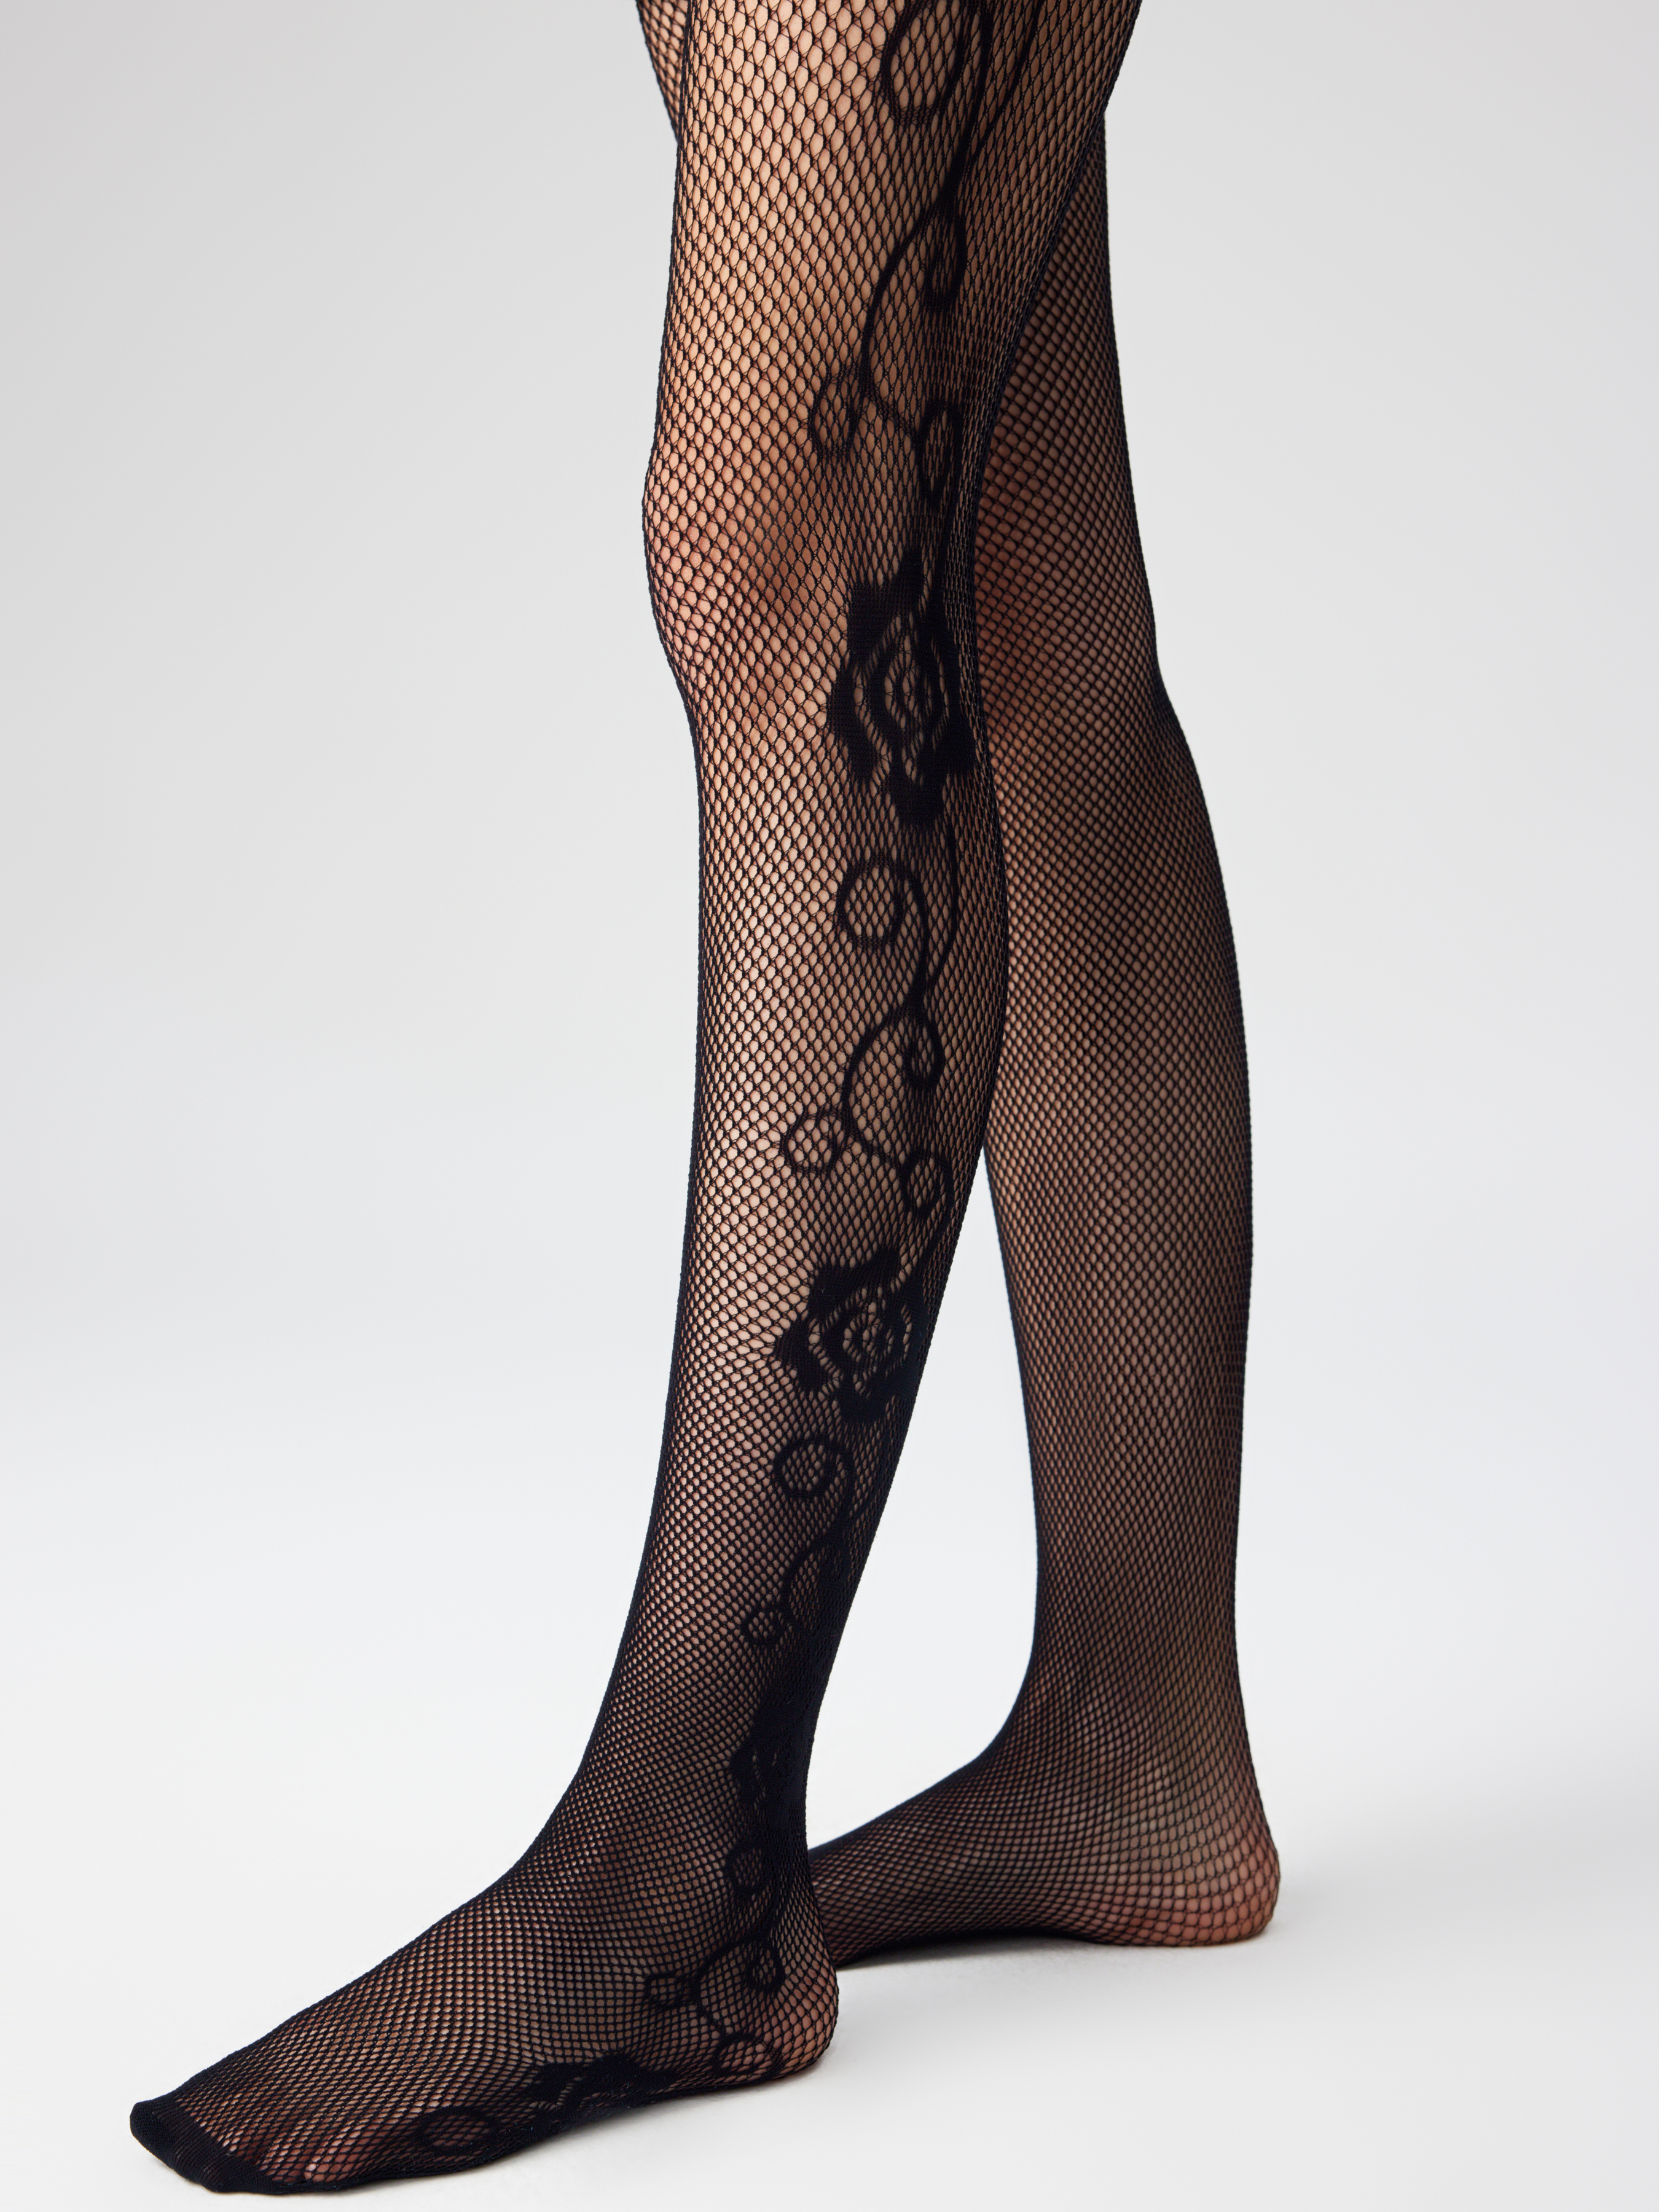 Lace Fishnet Tights